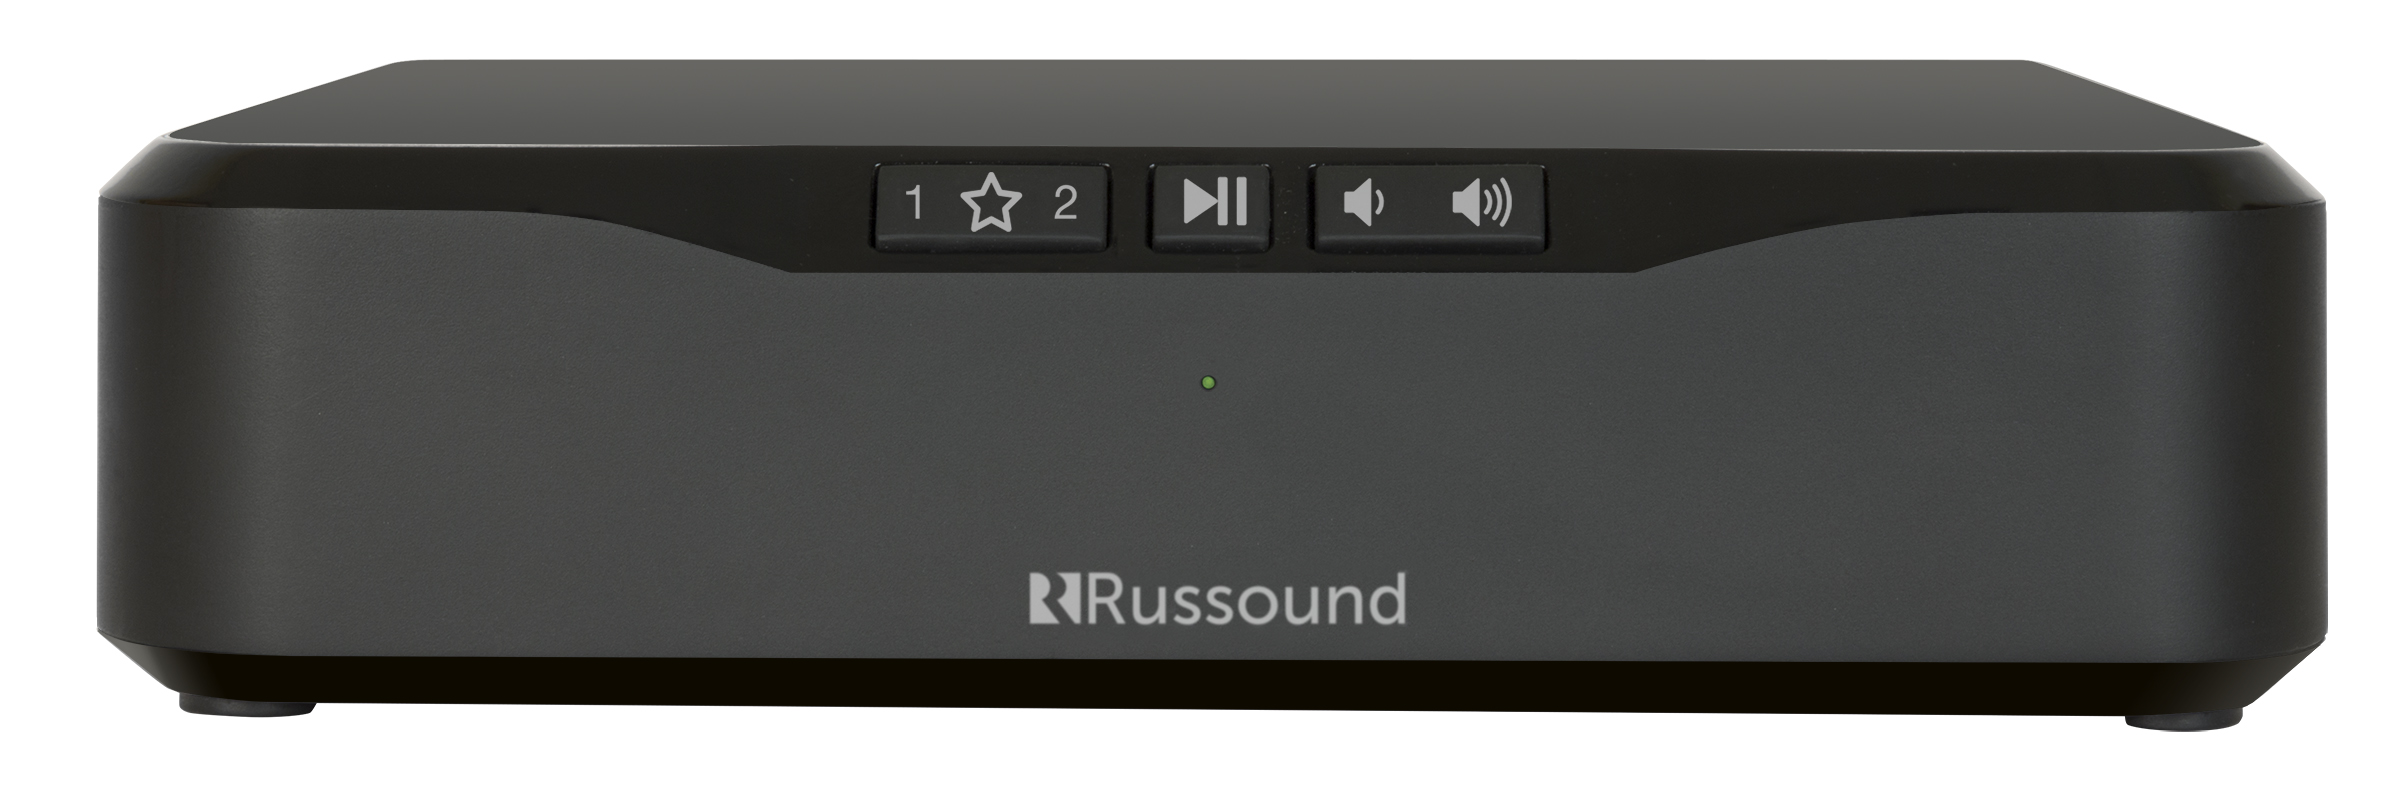 Russound | Wi-Fi Streaming
Zone Amplifier